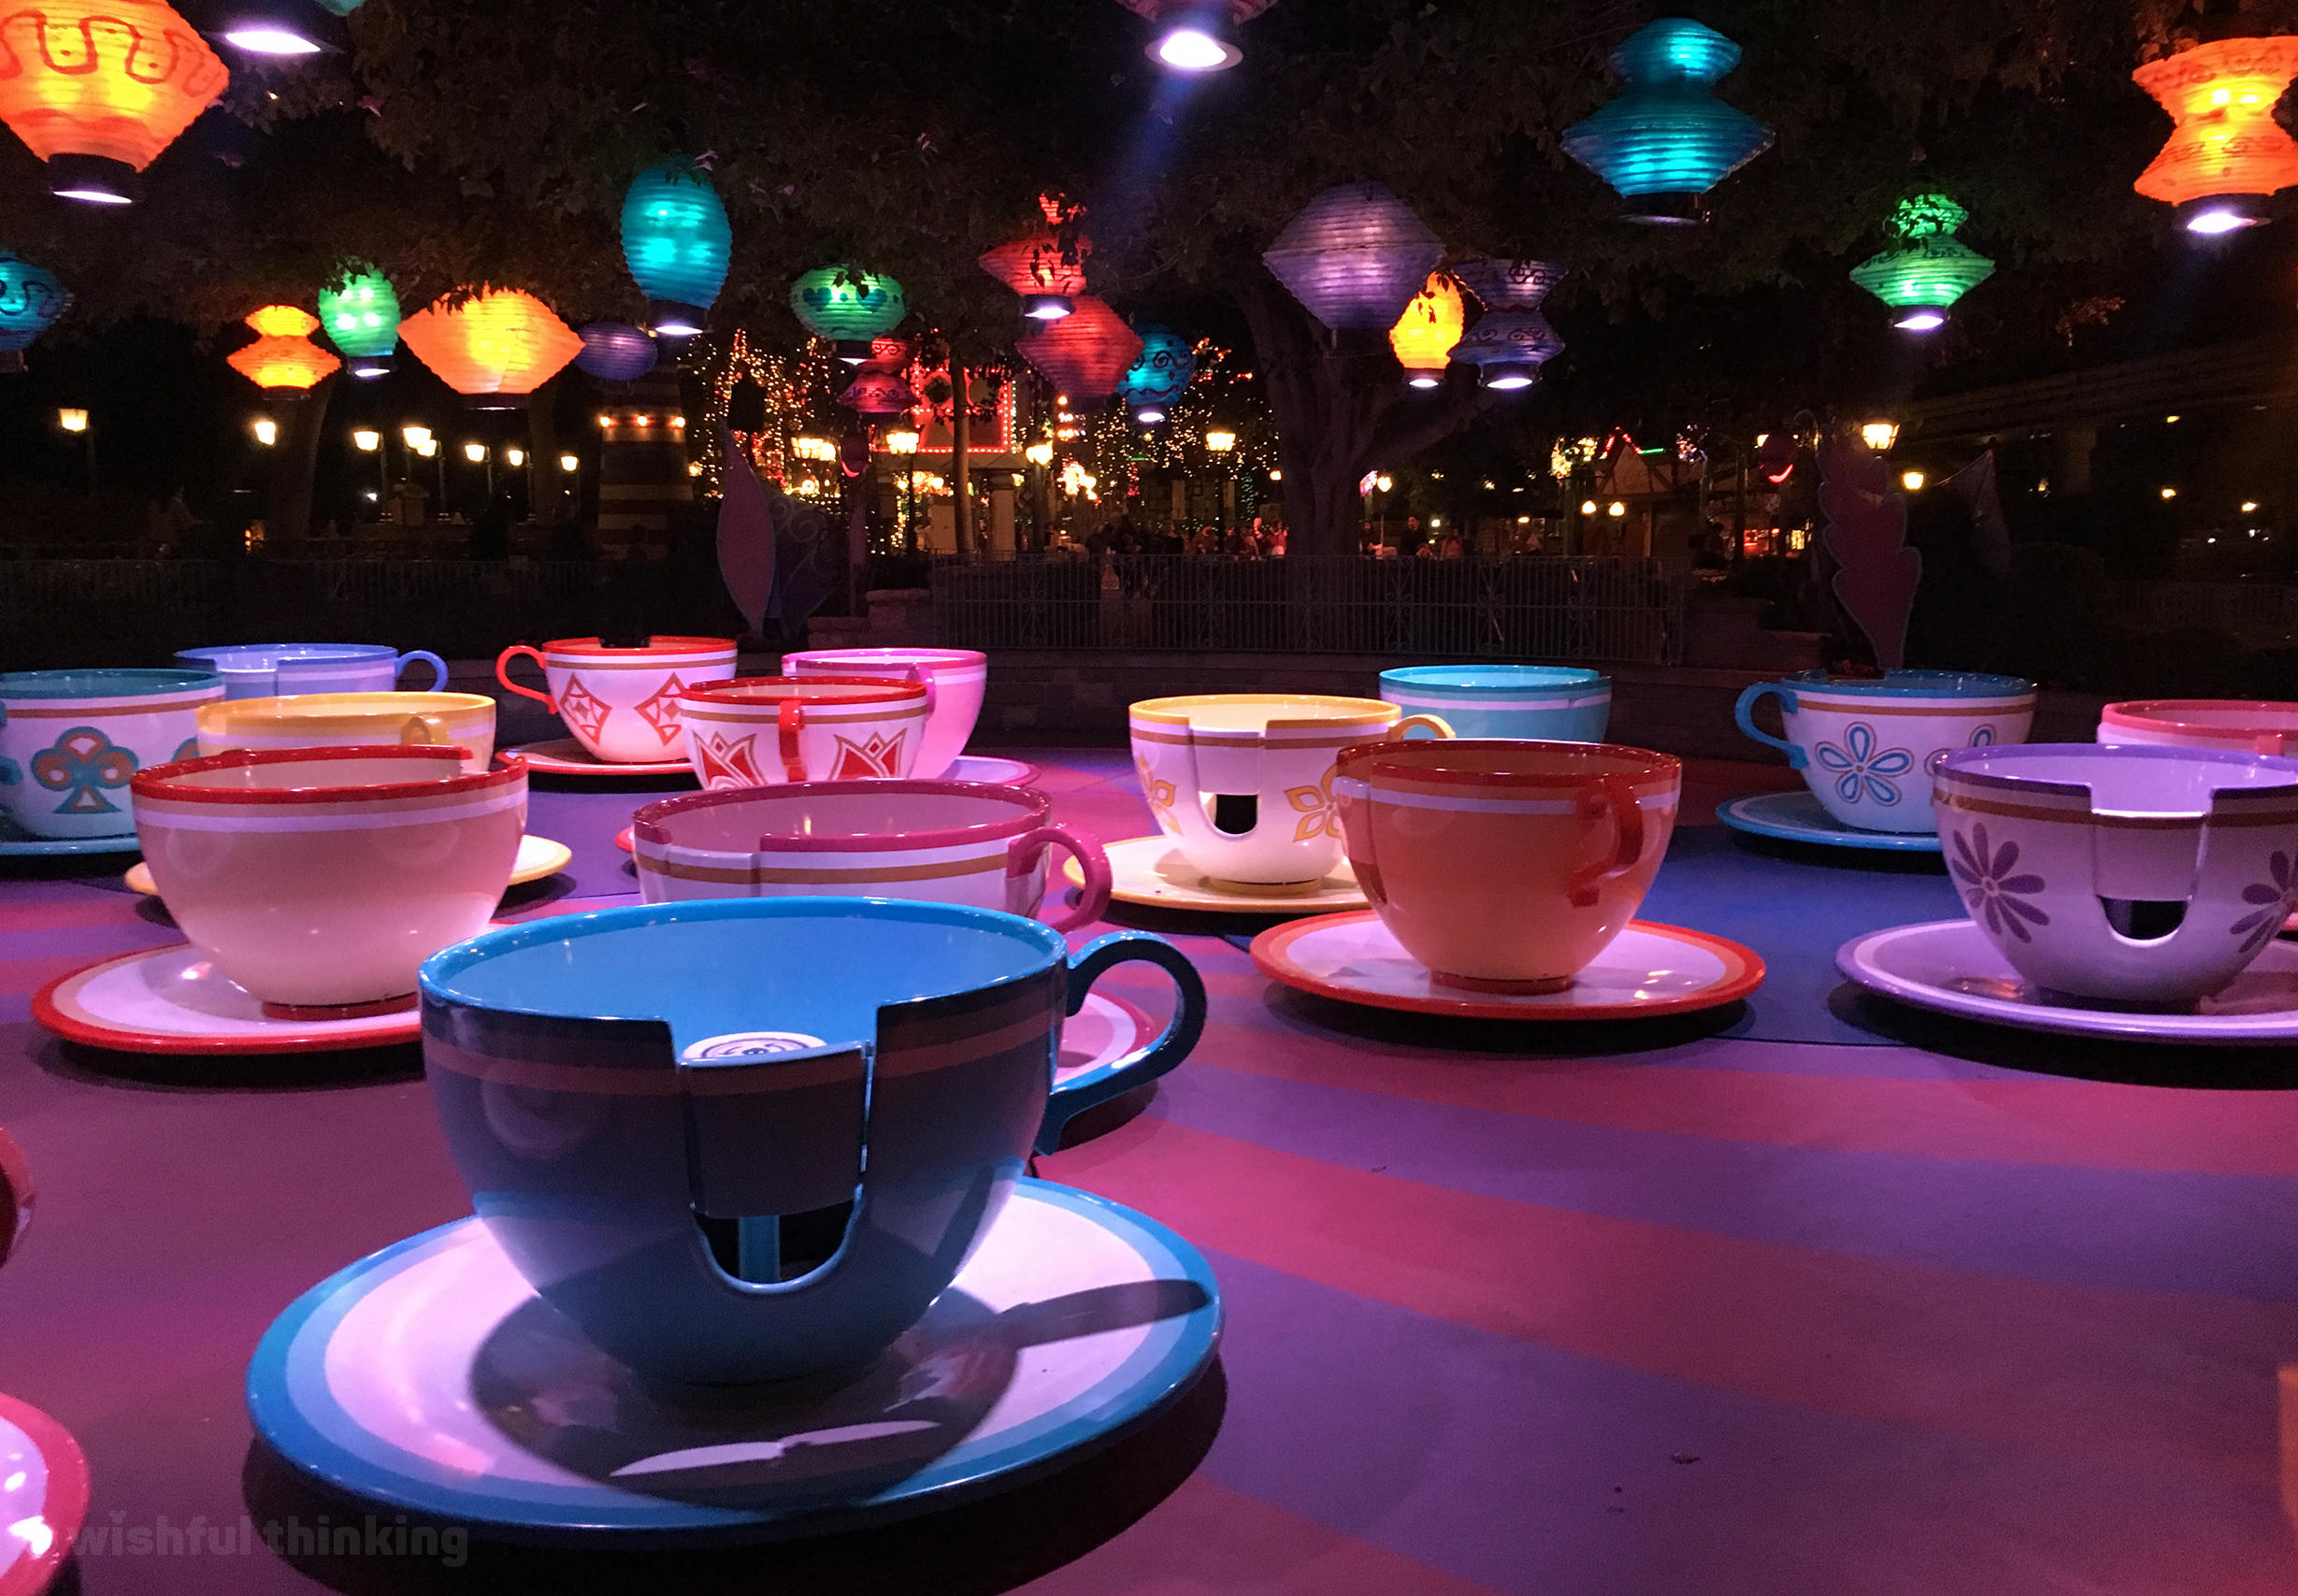 The Mad Tea Party's iconic spinning teacups await eager guests at Disneyland in Anaheim, California